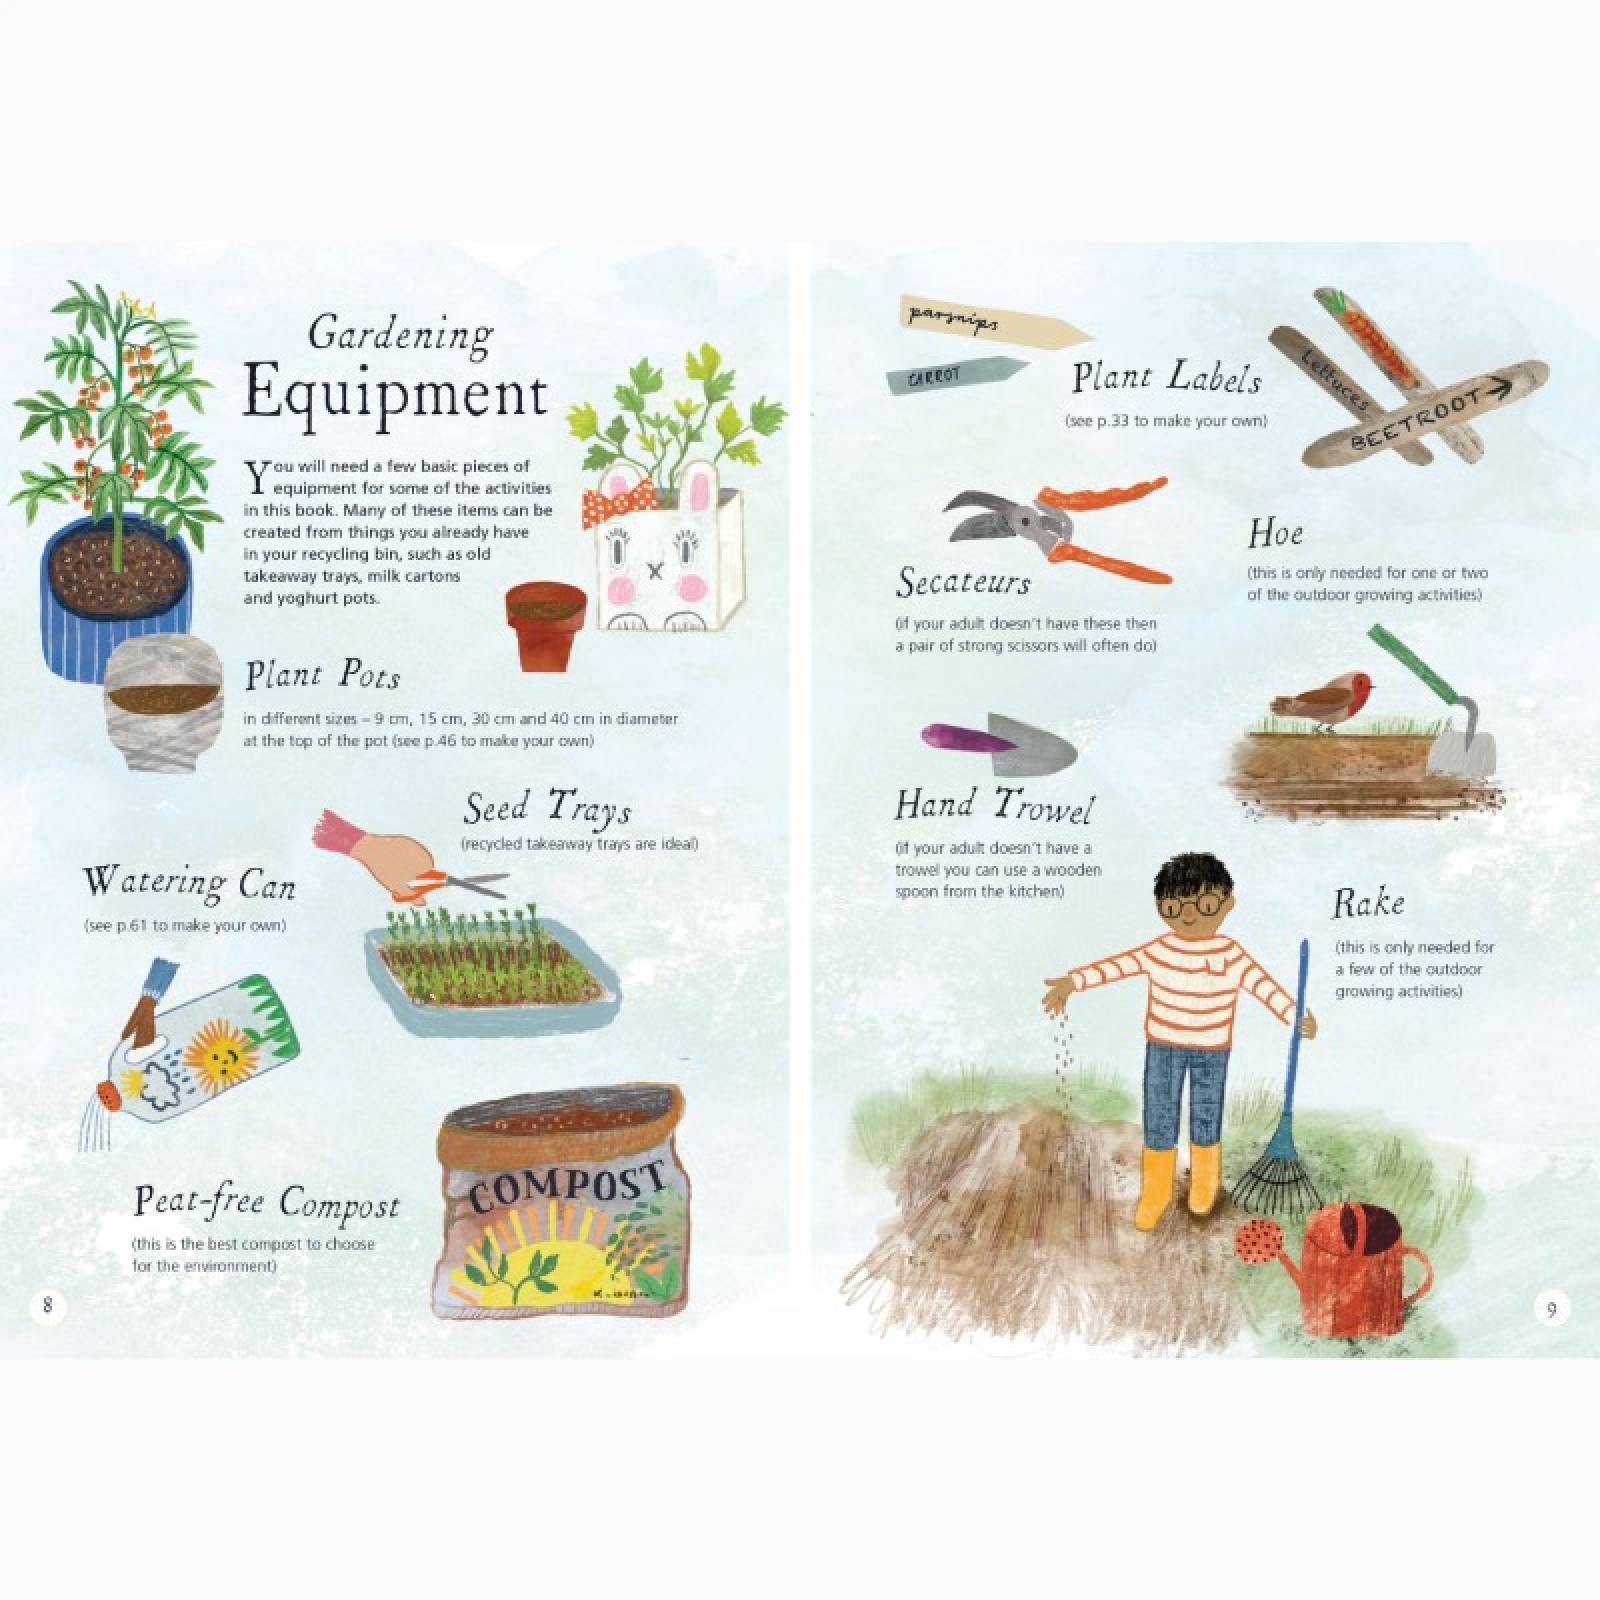 Grow, Forage & Make By Alys Fowler - Paperback Book thumbnails